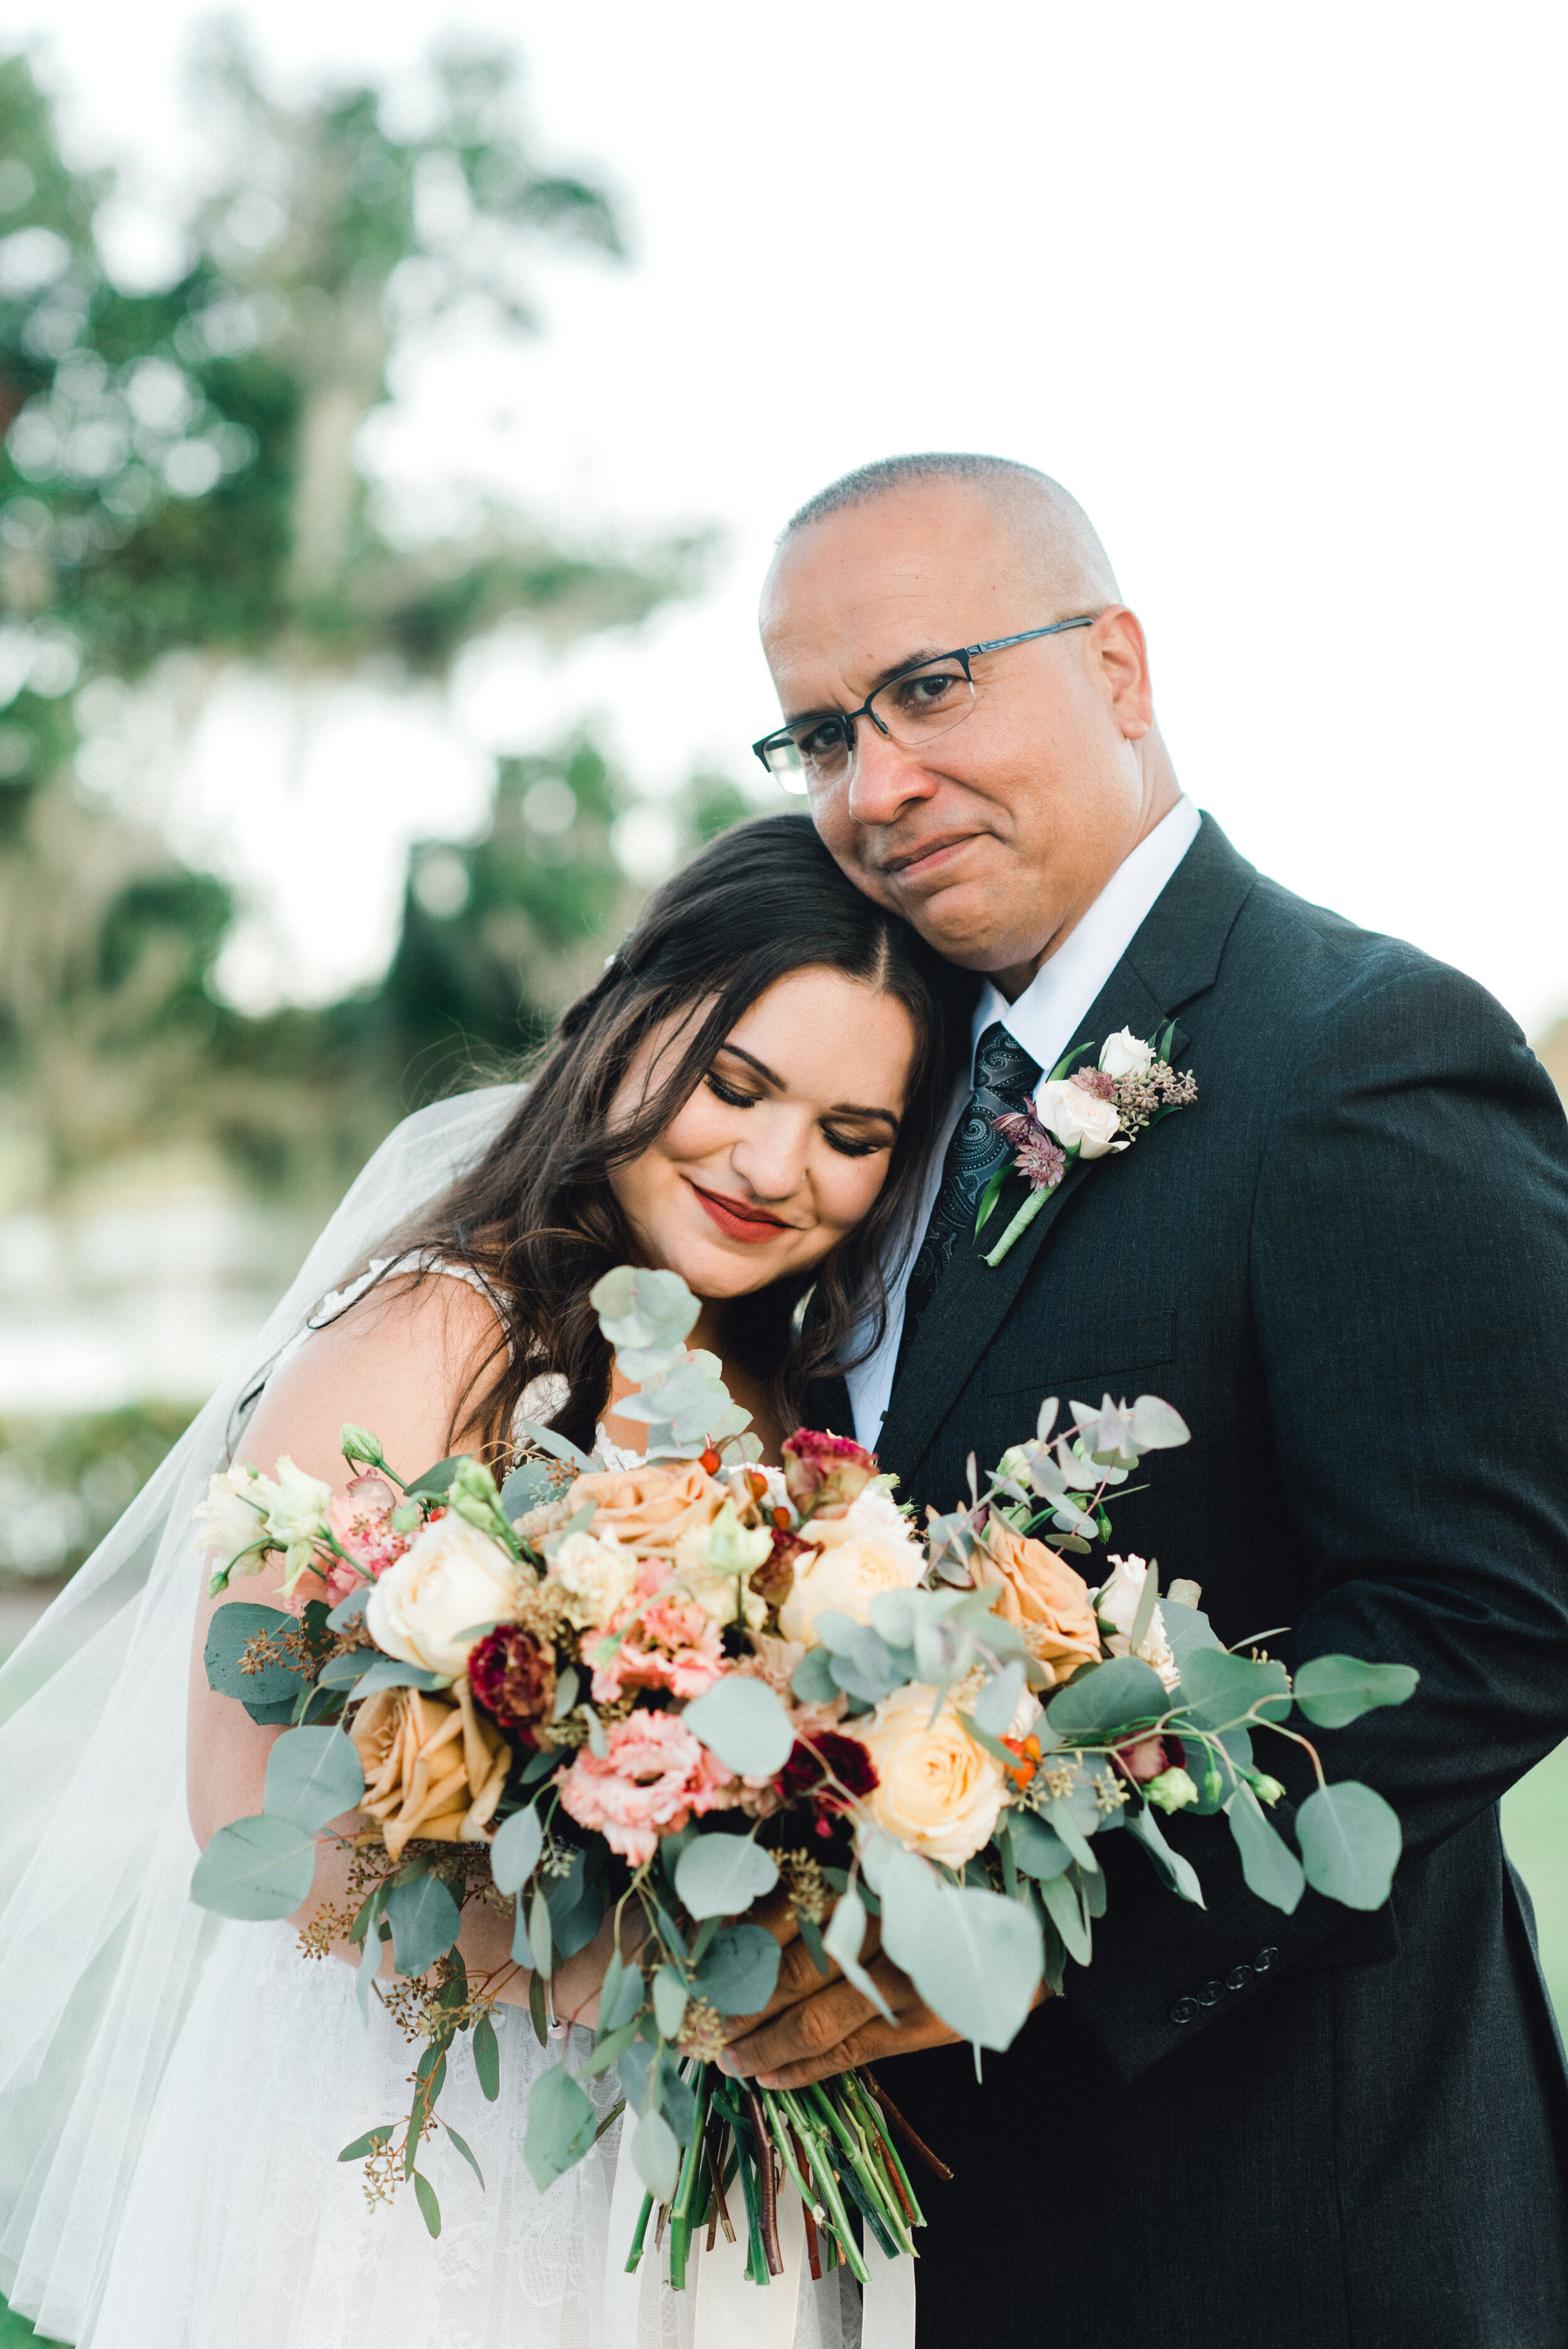 Bluegrass Chic Eagle Creek That First Moment Photography bridal bouquet in burgundy and rust color flowers